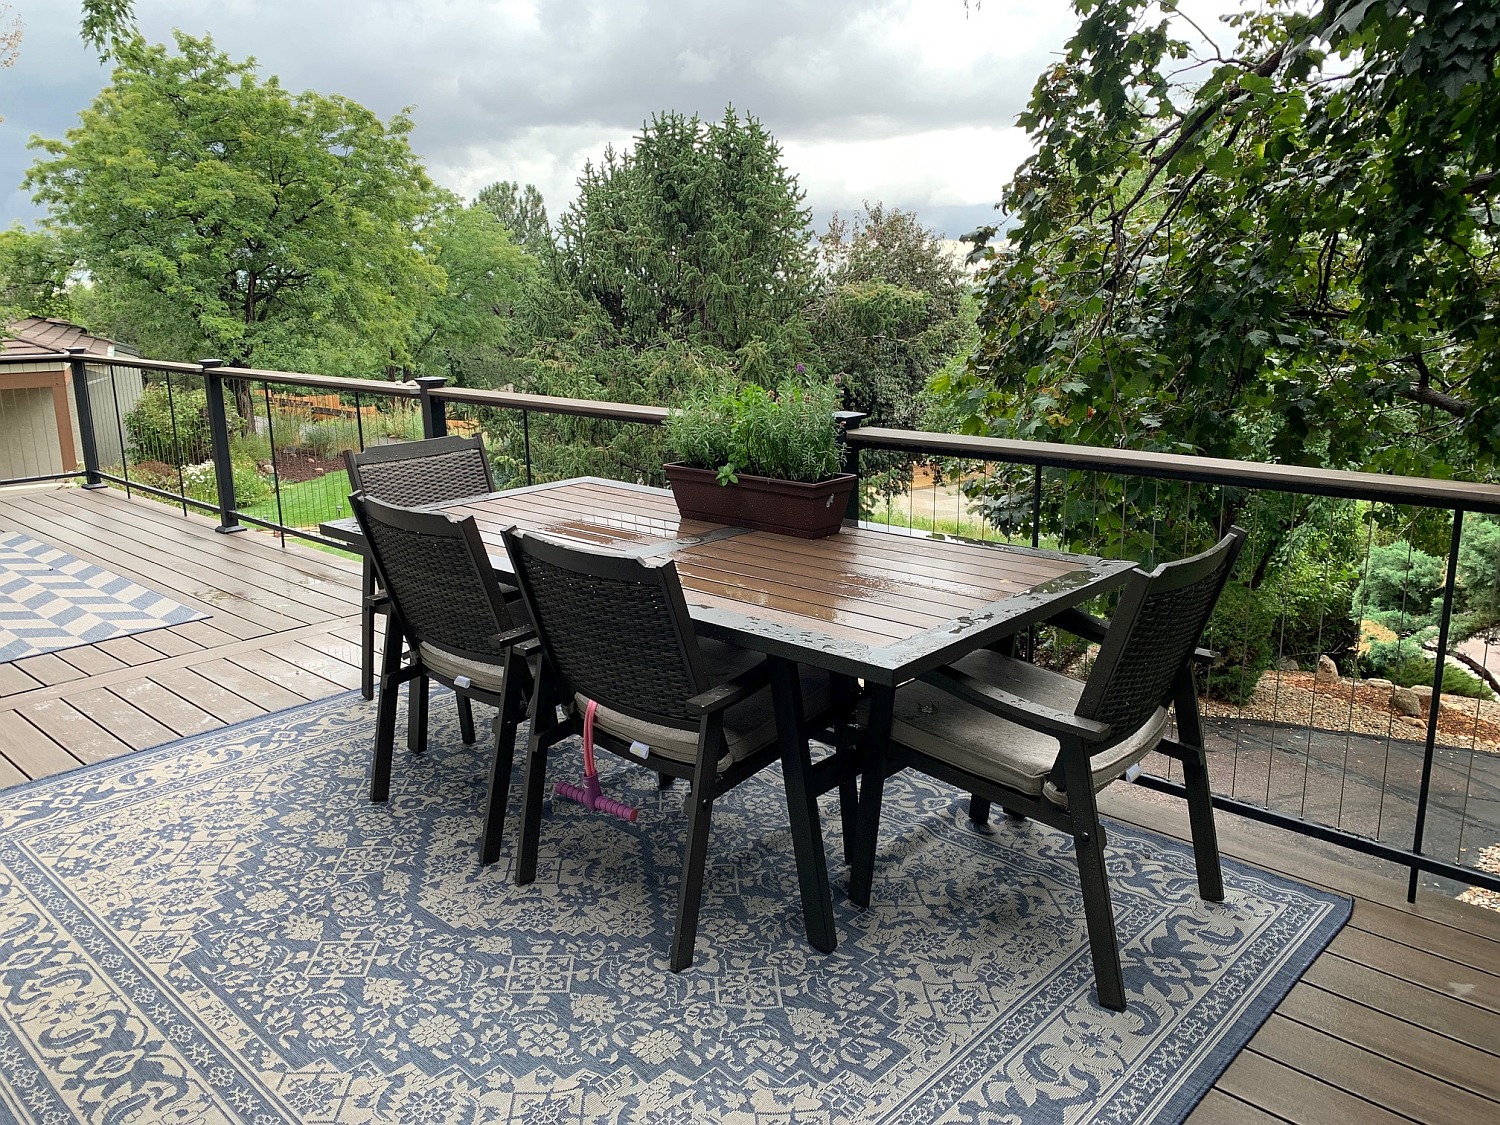 Composite deck with a metal deck railing featuring vertical cables and a drink cap. The owners added a rug and dining area to the deck